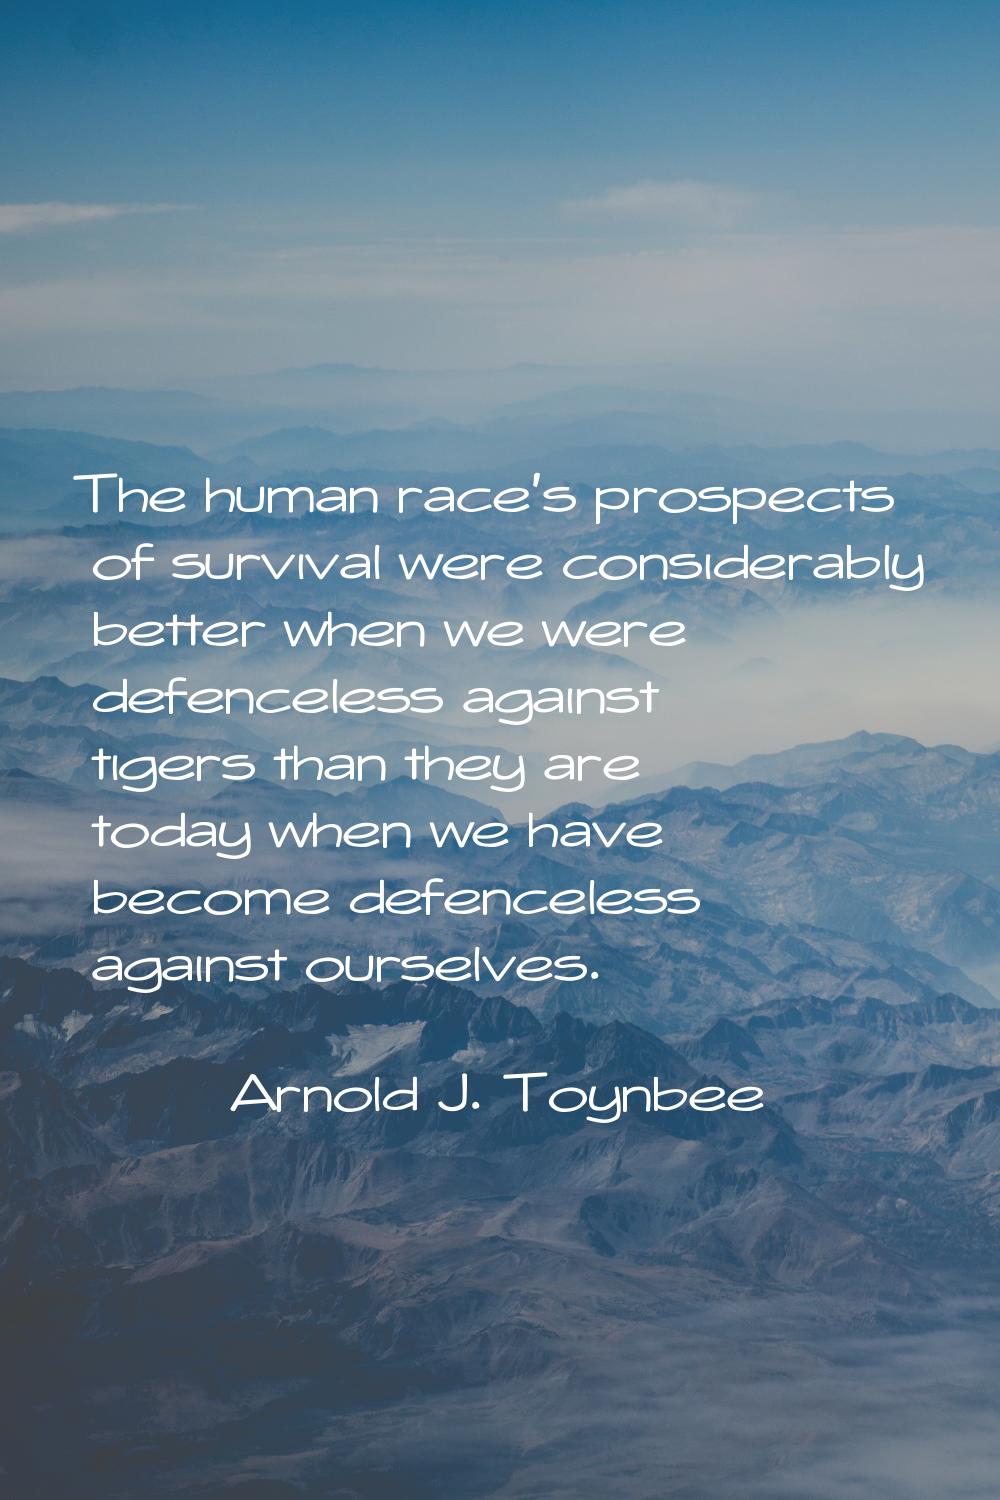 The human race's prospects of survival were considerably better when we were defenceless against ti